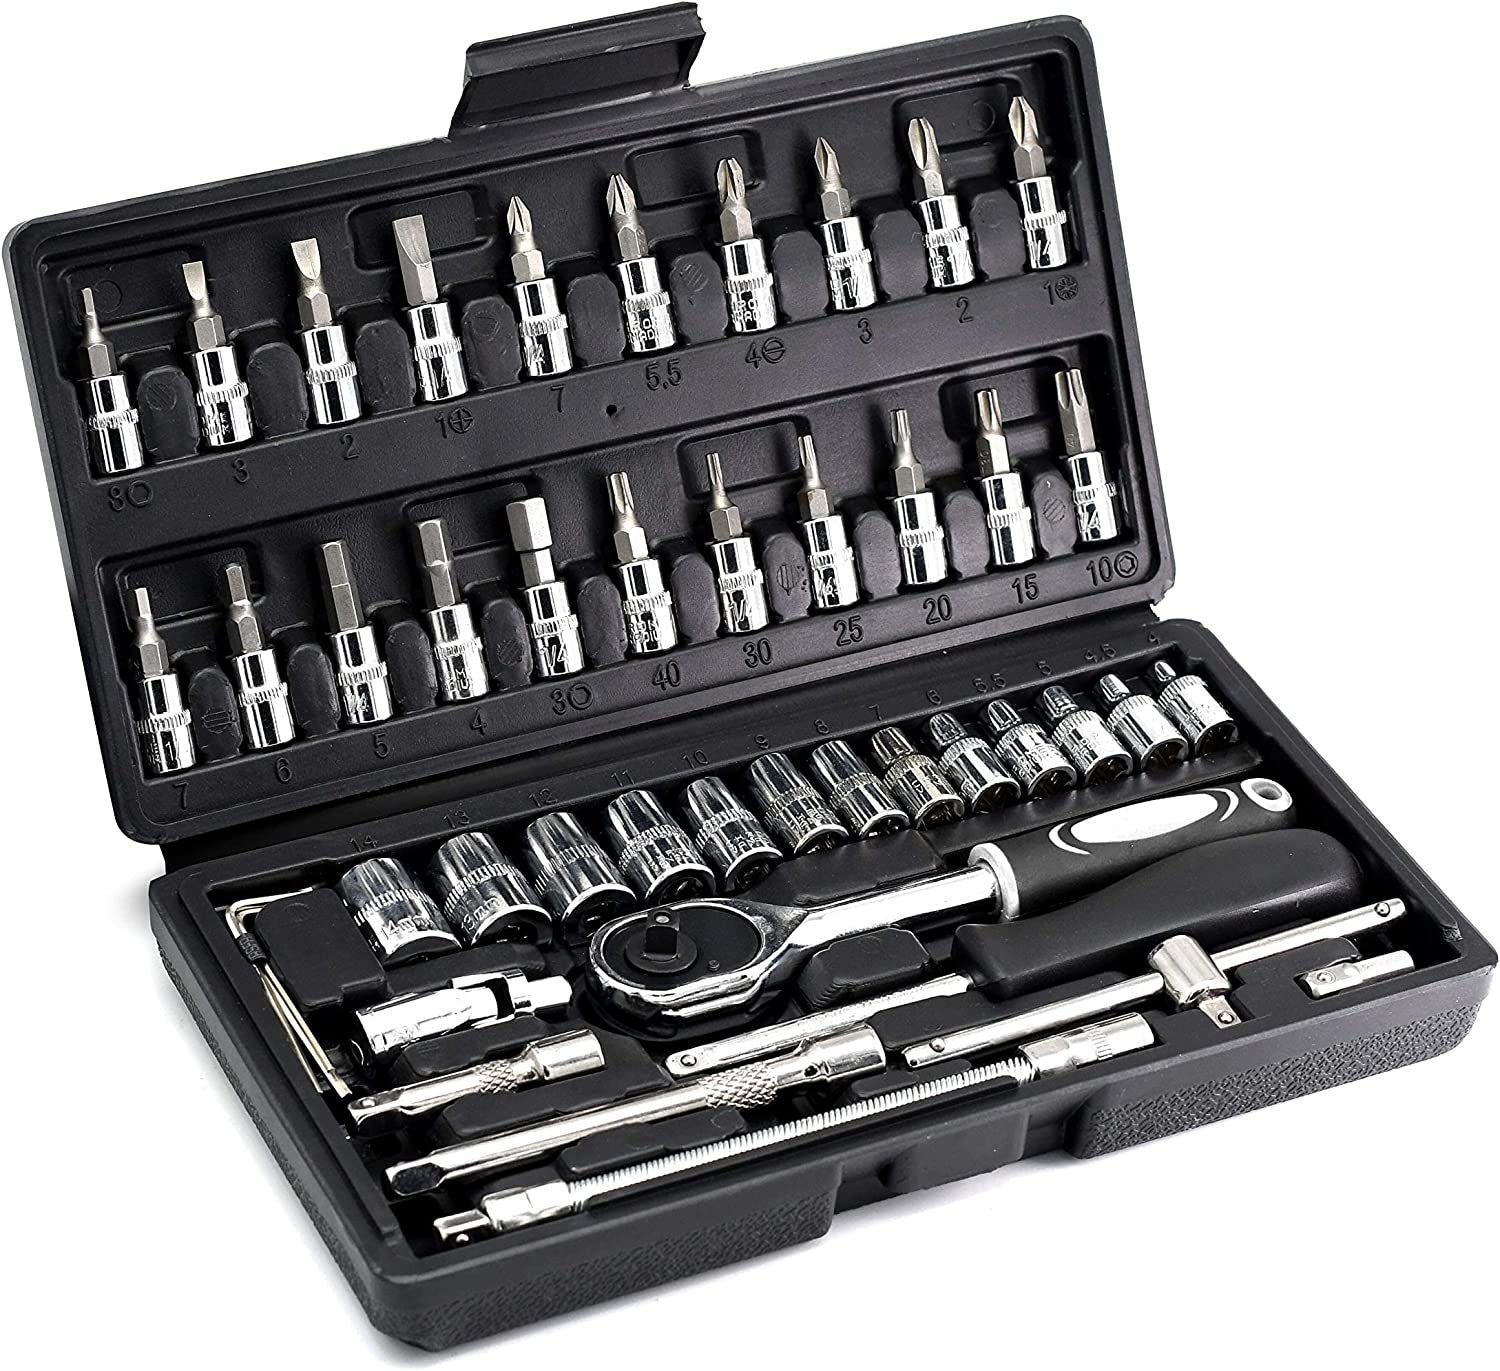 46PCS 1/4 Inch Drive Socket Set,Metric Ratchet Wrench Set with 4-14Mm CR-V Sockets,S2 Bits,Extension Bars,Mechanic Tool Kits for Household Auto Repair